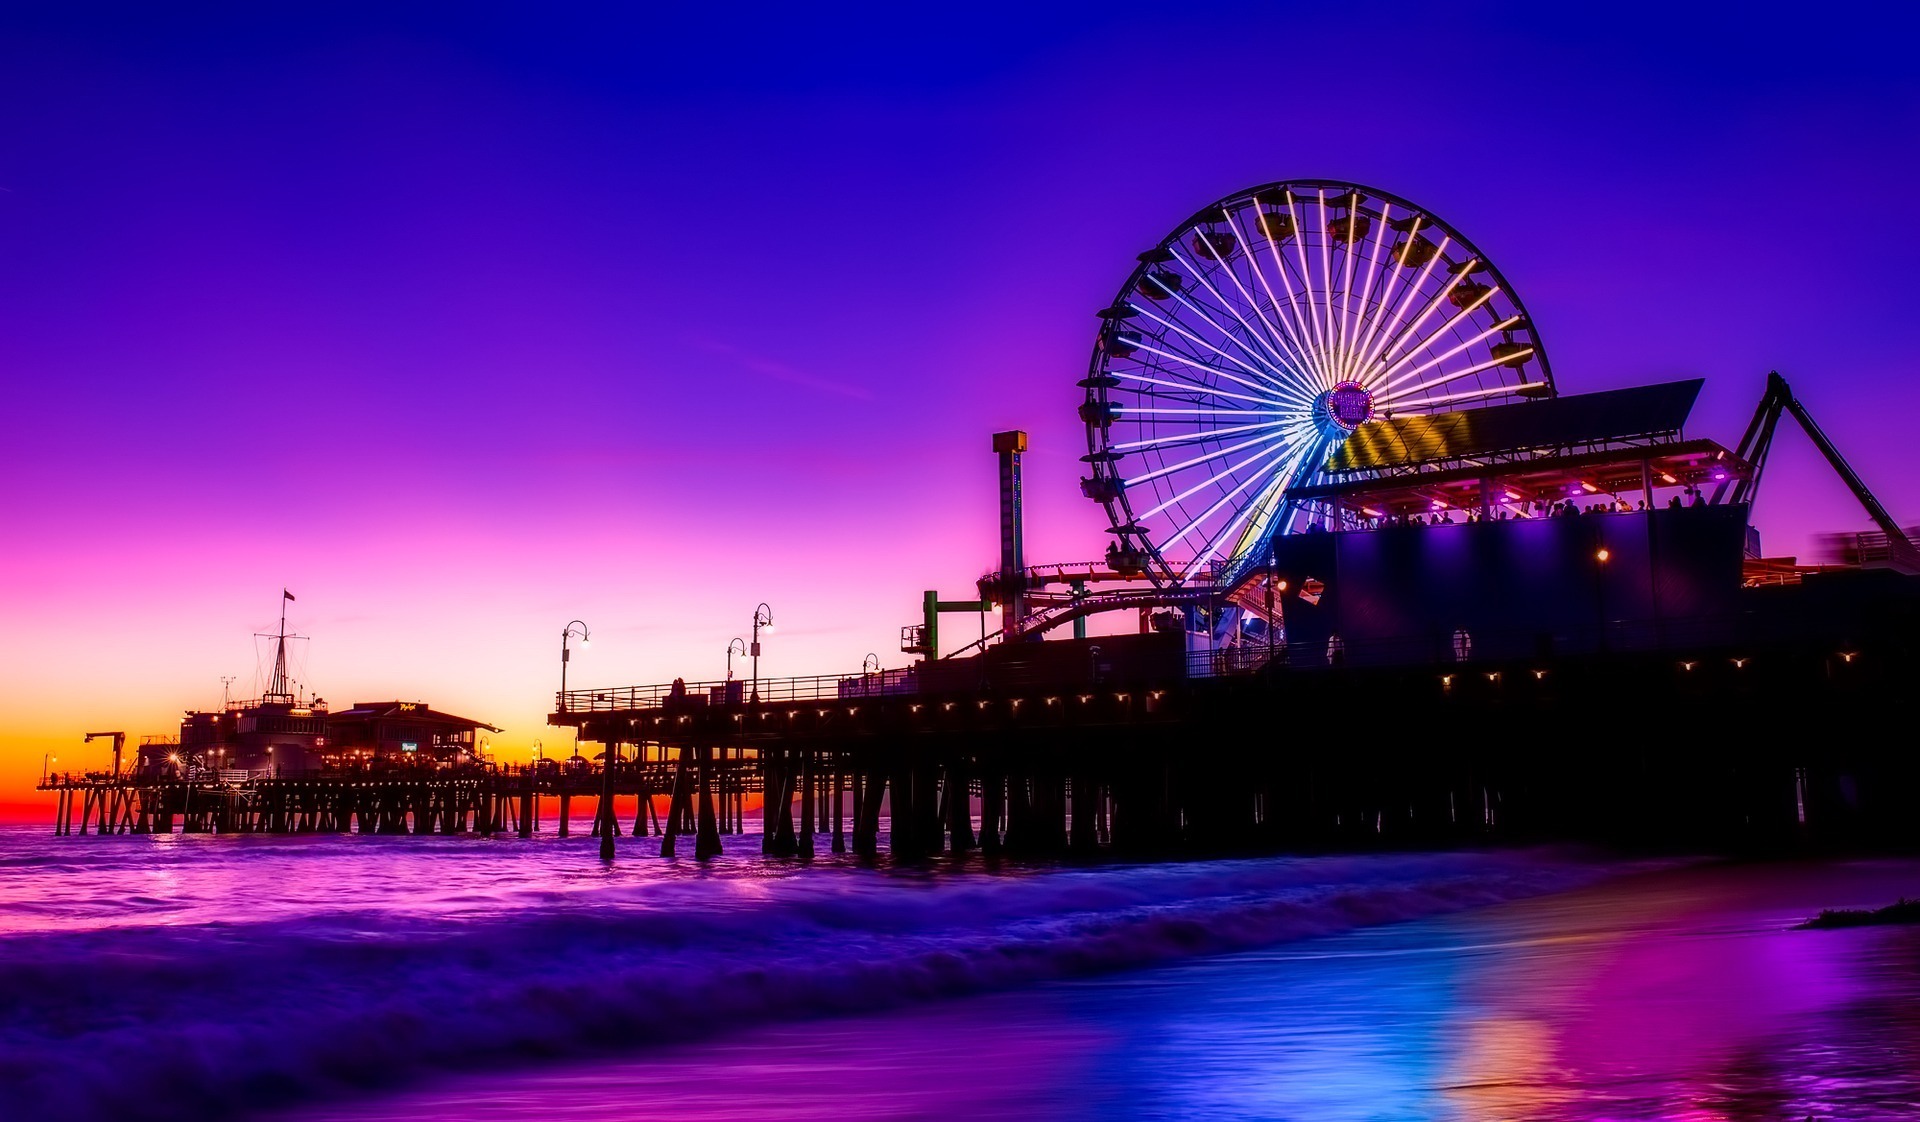 7 Must-Go Places in Santa Monica if You are Planning a Trip to the